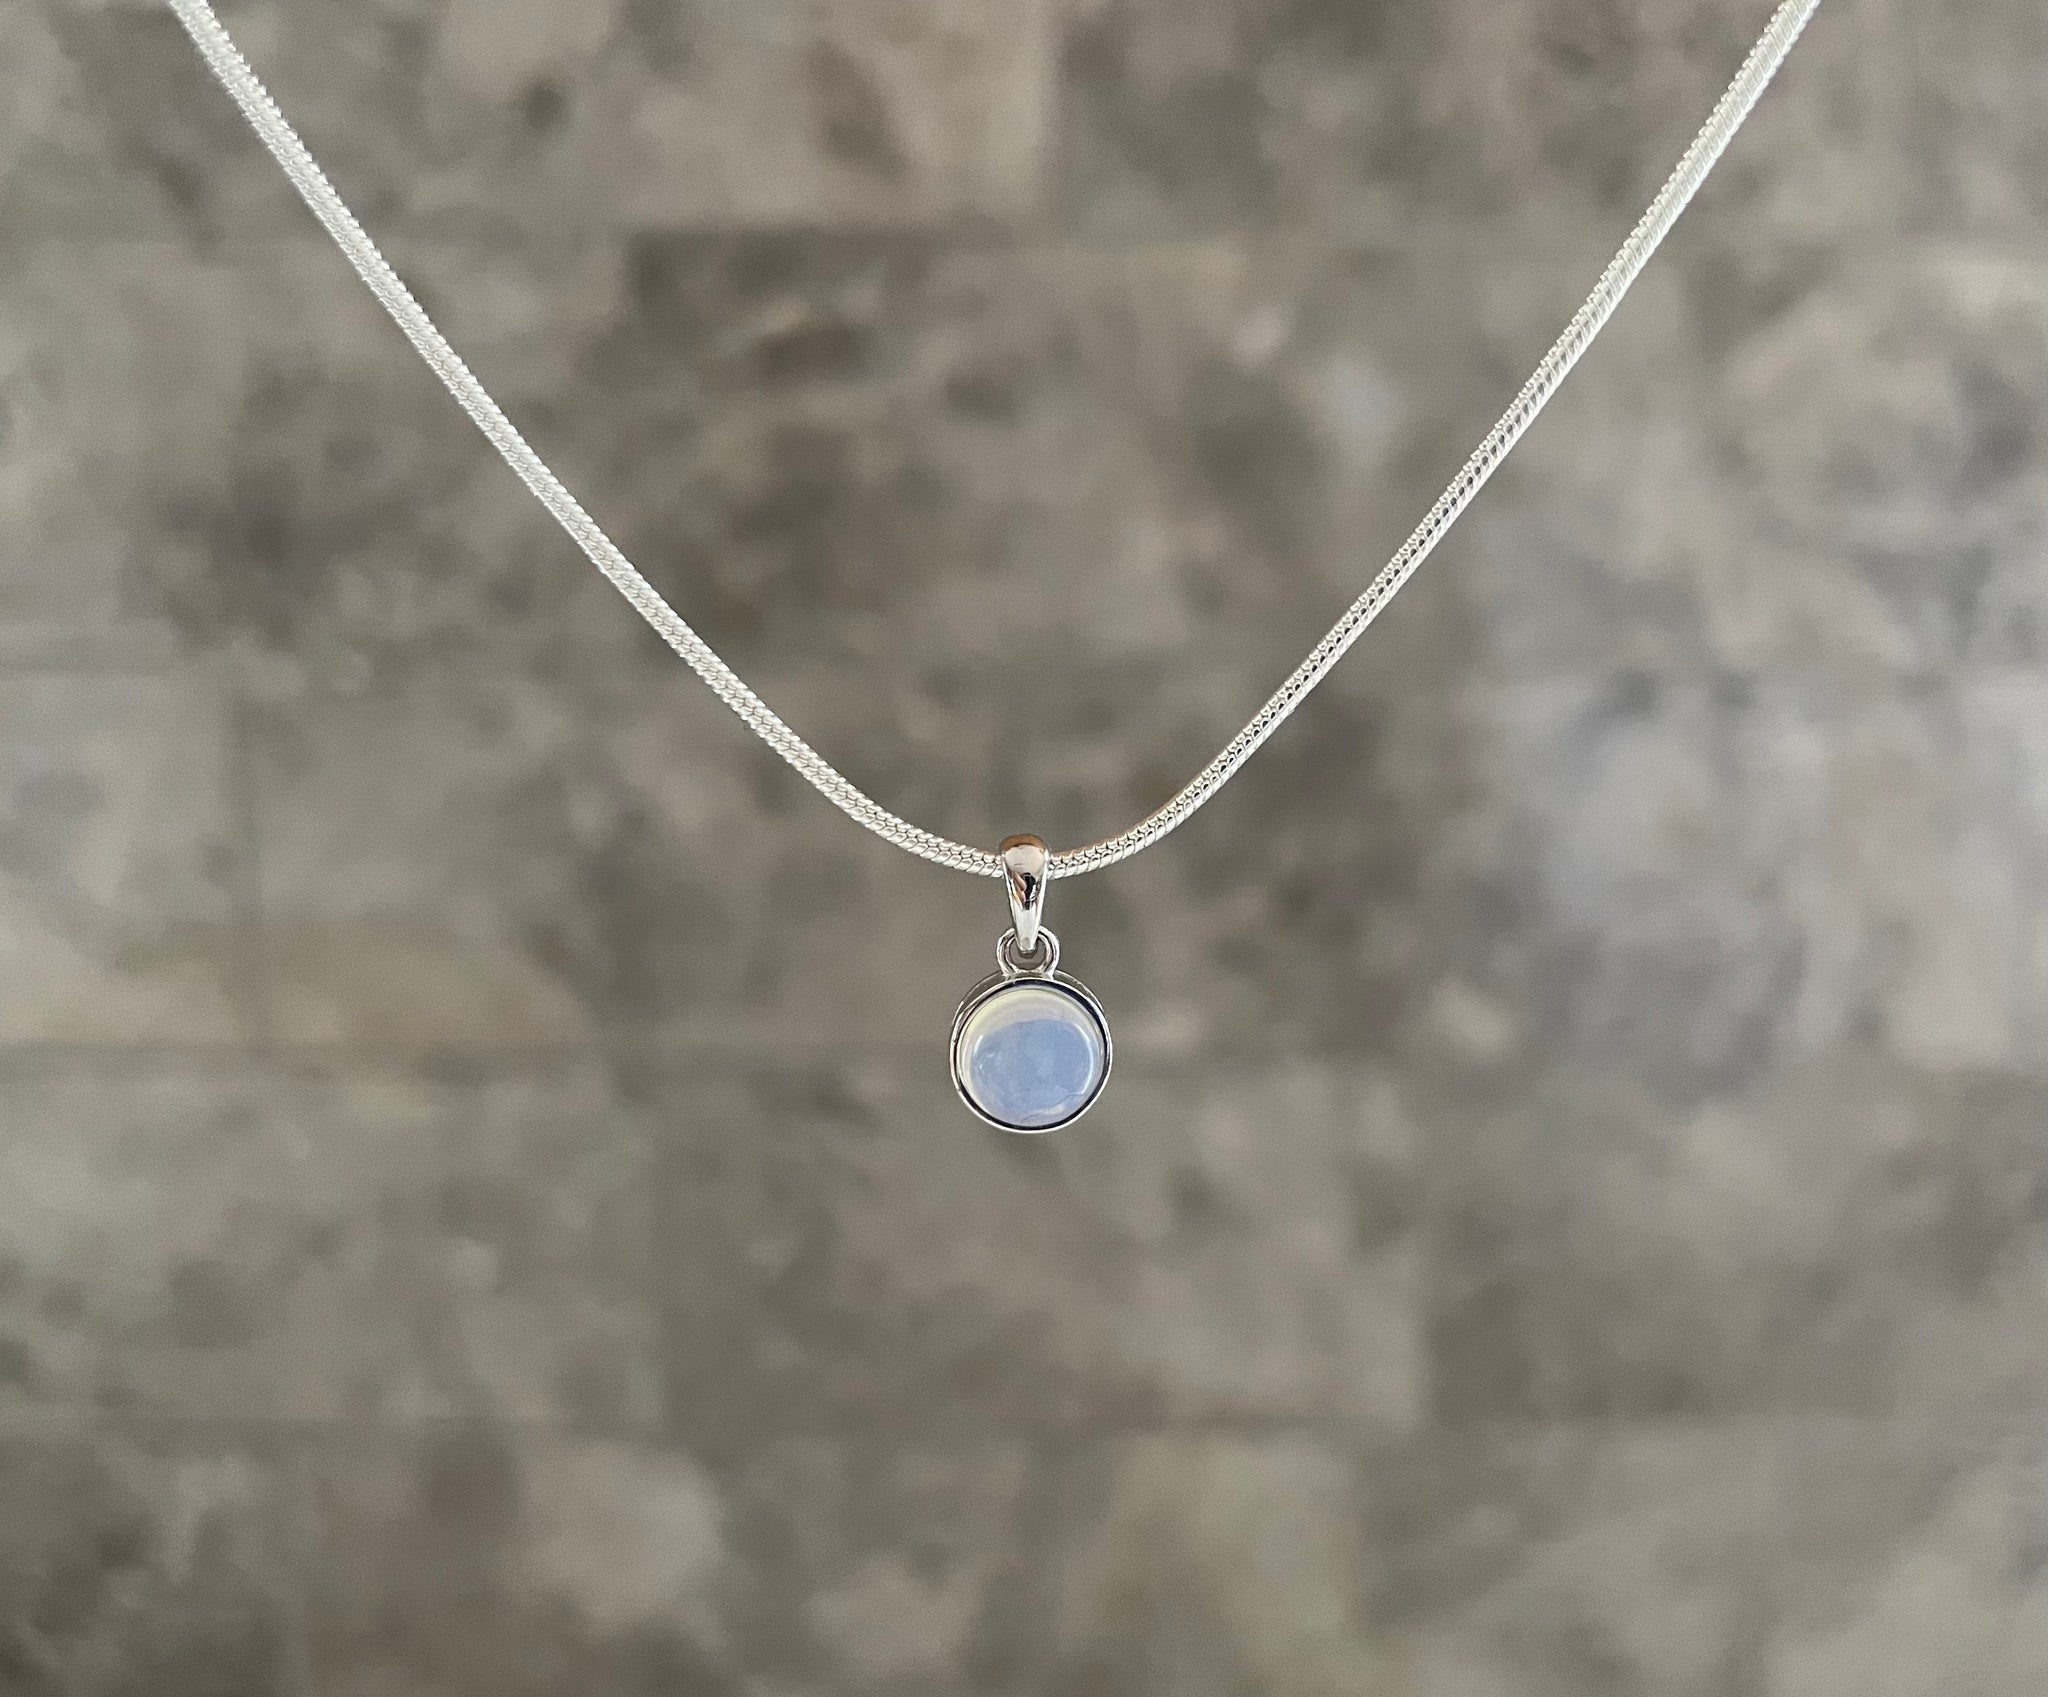 Dainty Opal Necklace, 925 Stering Silver 1mm Snake Chain. Minimalist October Birthstone